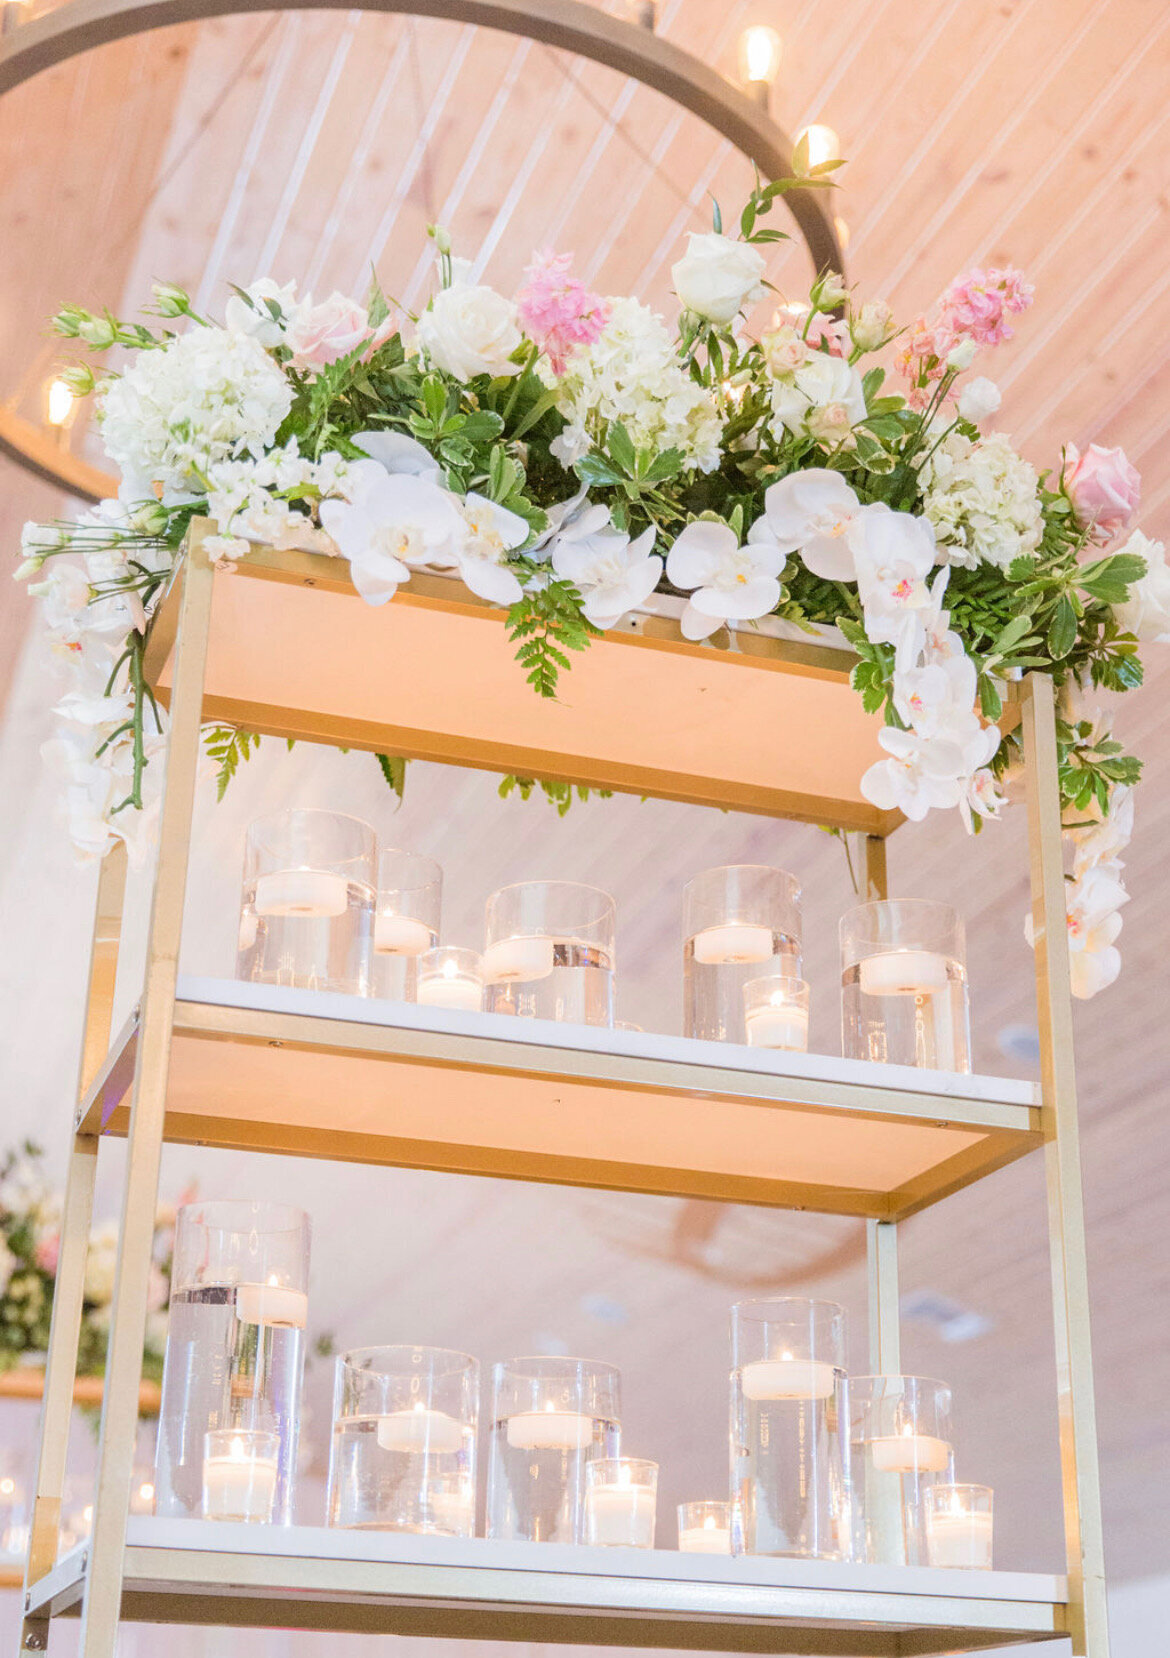 glass candles on a shelf at a wedding